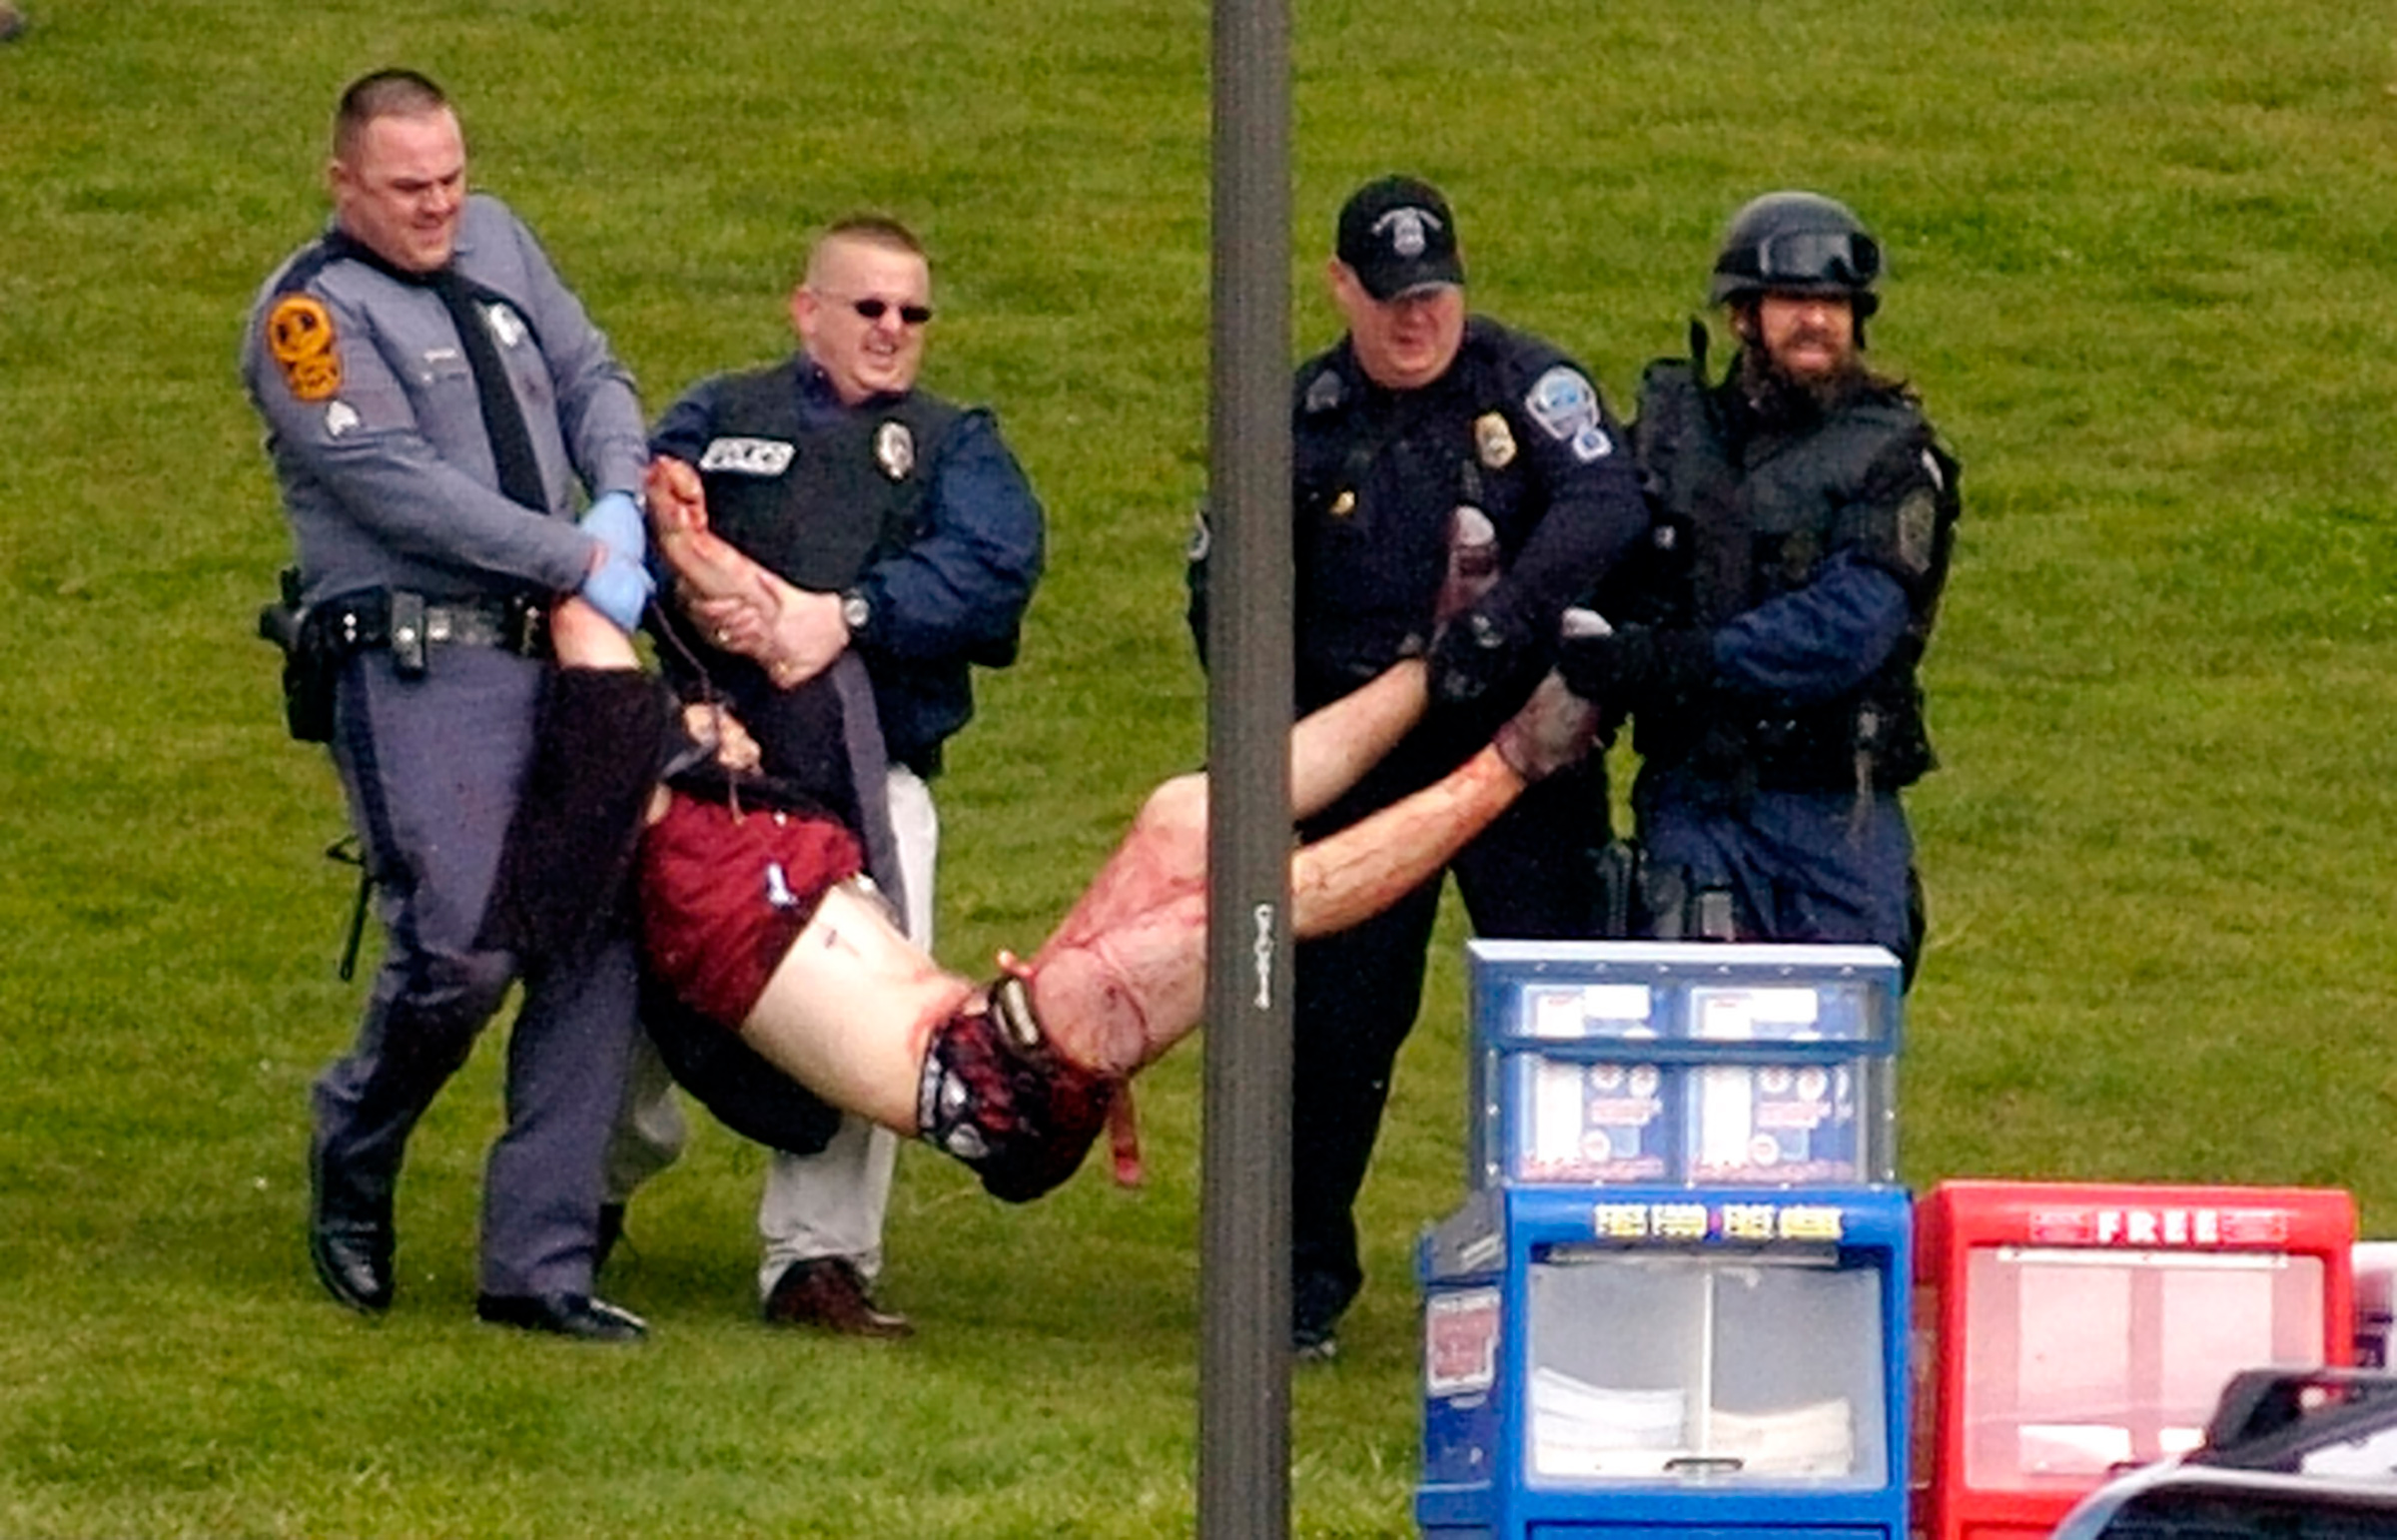 Student Kevin Sterne, is carried out of Norris Hall at Virginia Tech in Blacksburg, Va. in this April 16, 2007 photo. Sterne was one of the wounded students who survived the mass shooting on April 16. (Alan Kim—The Roanoke Times/AP)